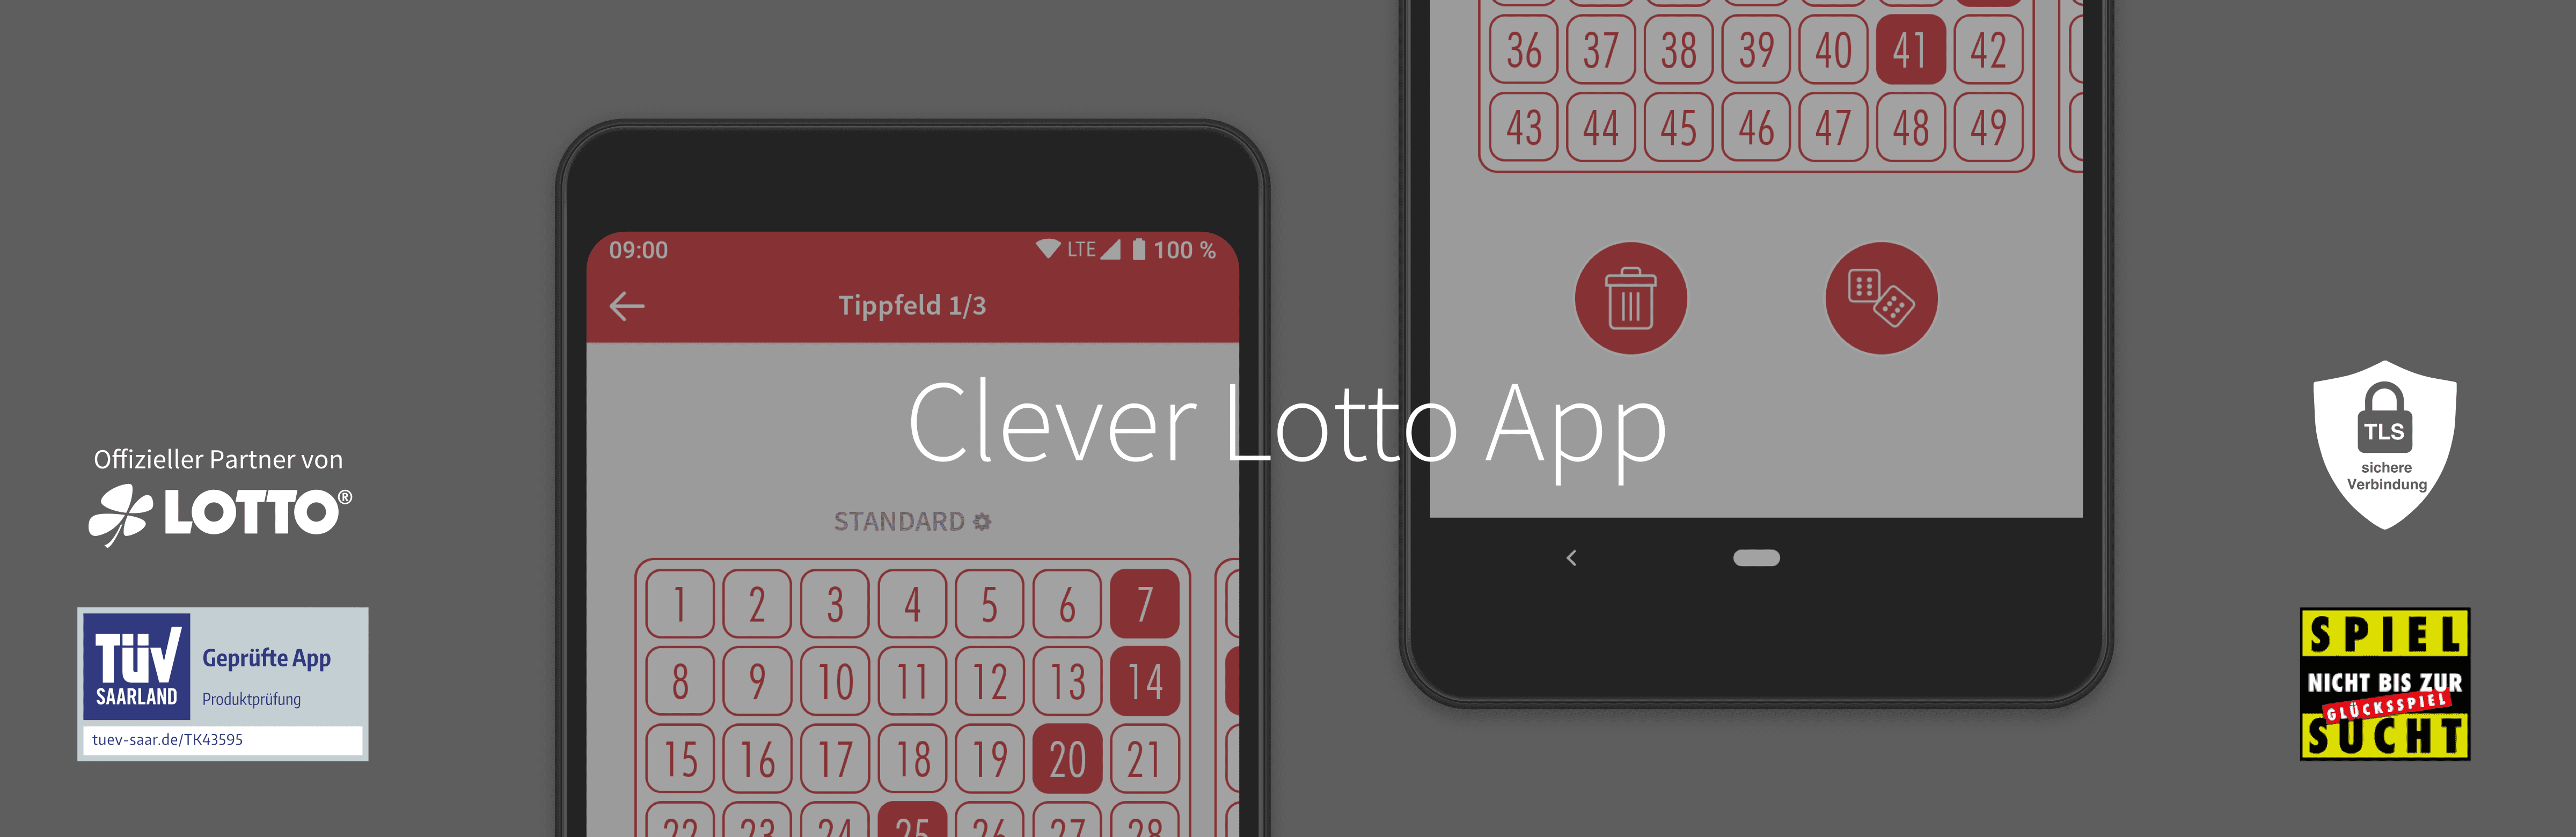 Clever Lotto Android